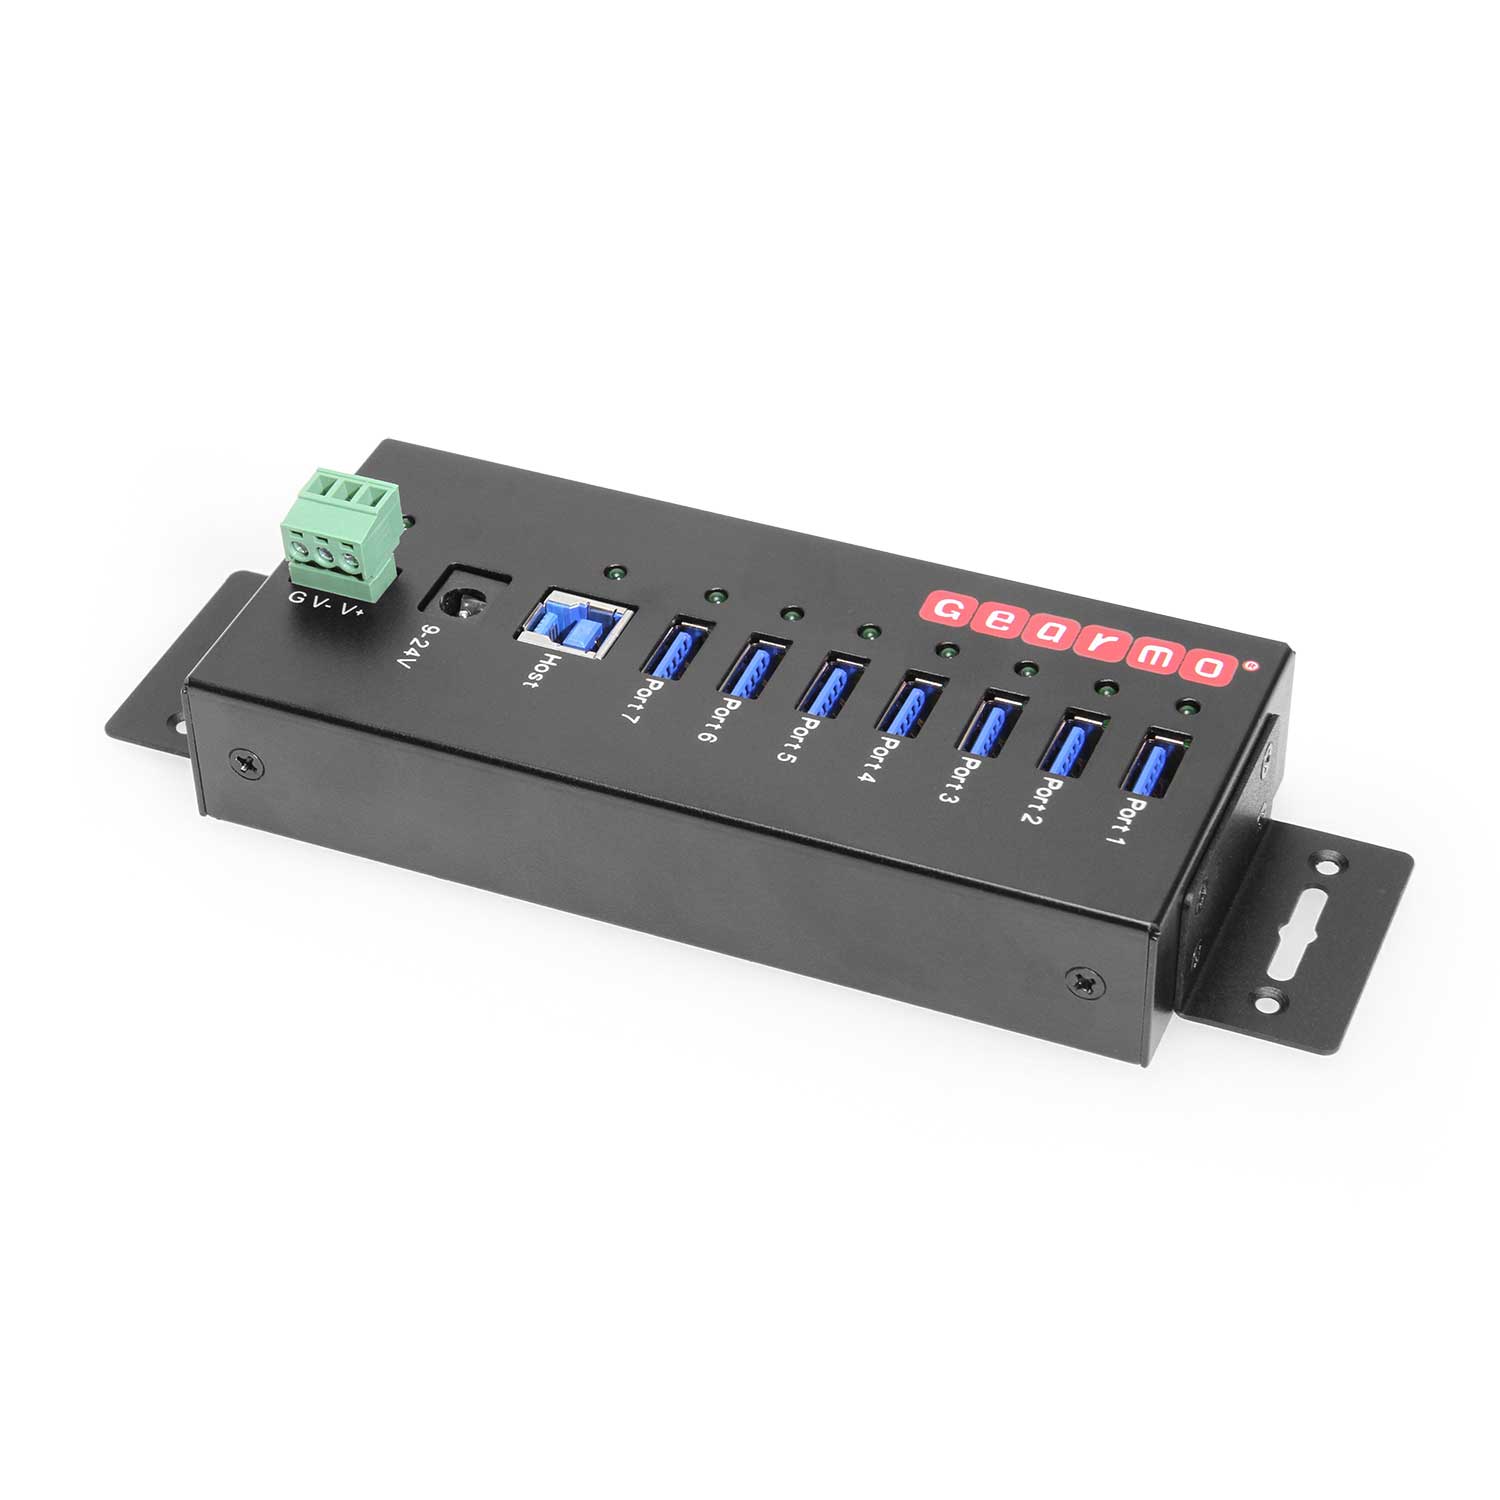 SIIG 4-Port and 7-Port Industrial USB 3.0 Hub with 15KV ESD Protection 